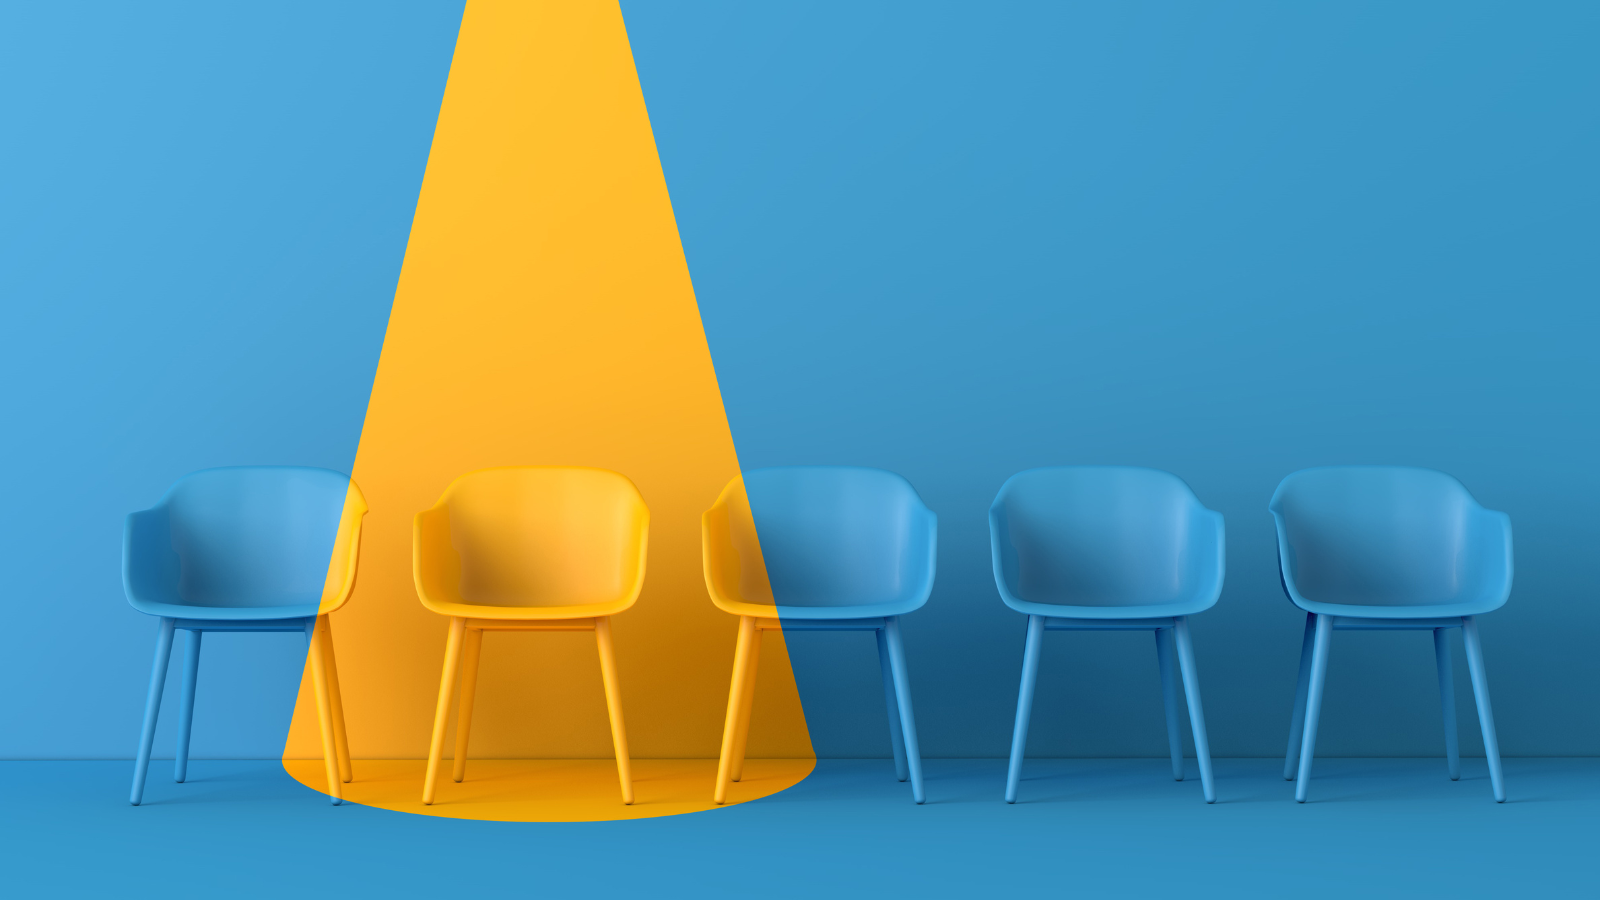 A spotlight on a yellow chair in a row of blue chairs